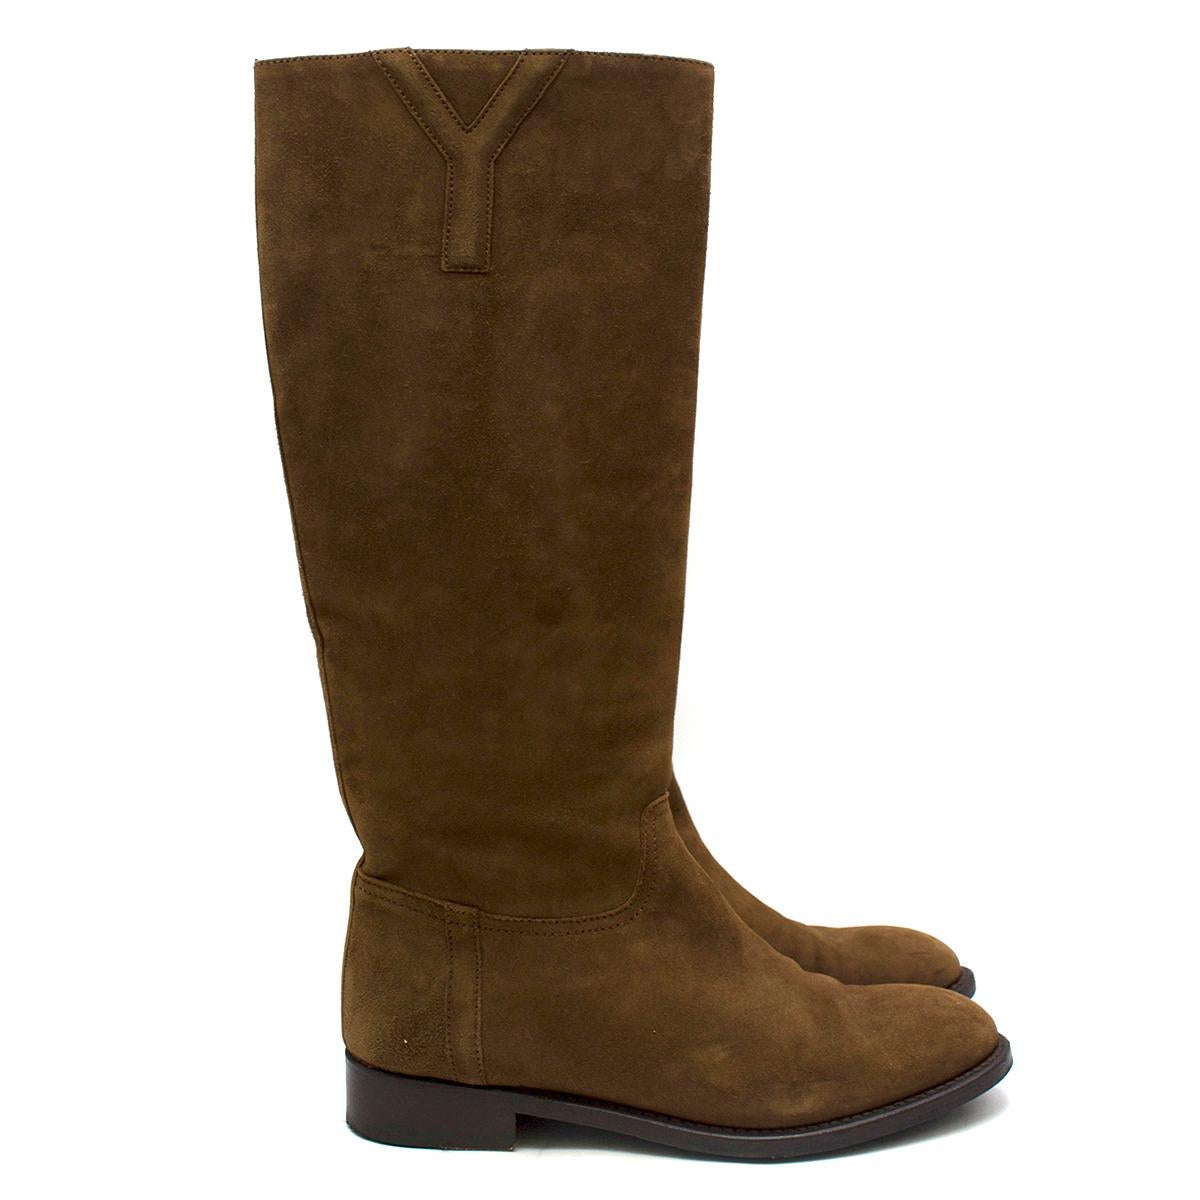 Yves Saint Laurent Brown Suede Tall Boots

- Knee high boots
- Brown suede
- almond toe
- Y stitching to the outer-corners 
This item comes with the alternative dust bag.

Please note, these items are pre-owned and may show some signs of storage,